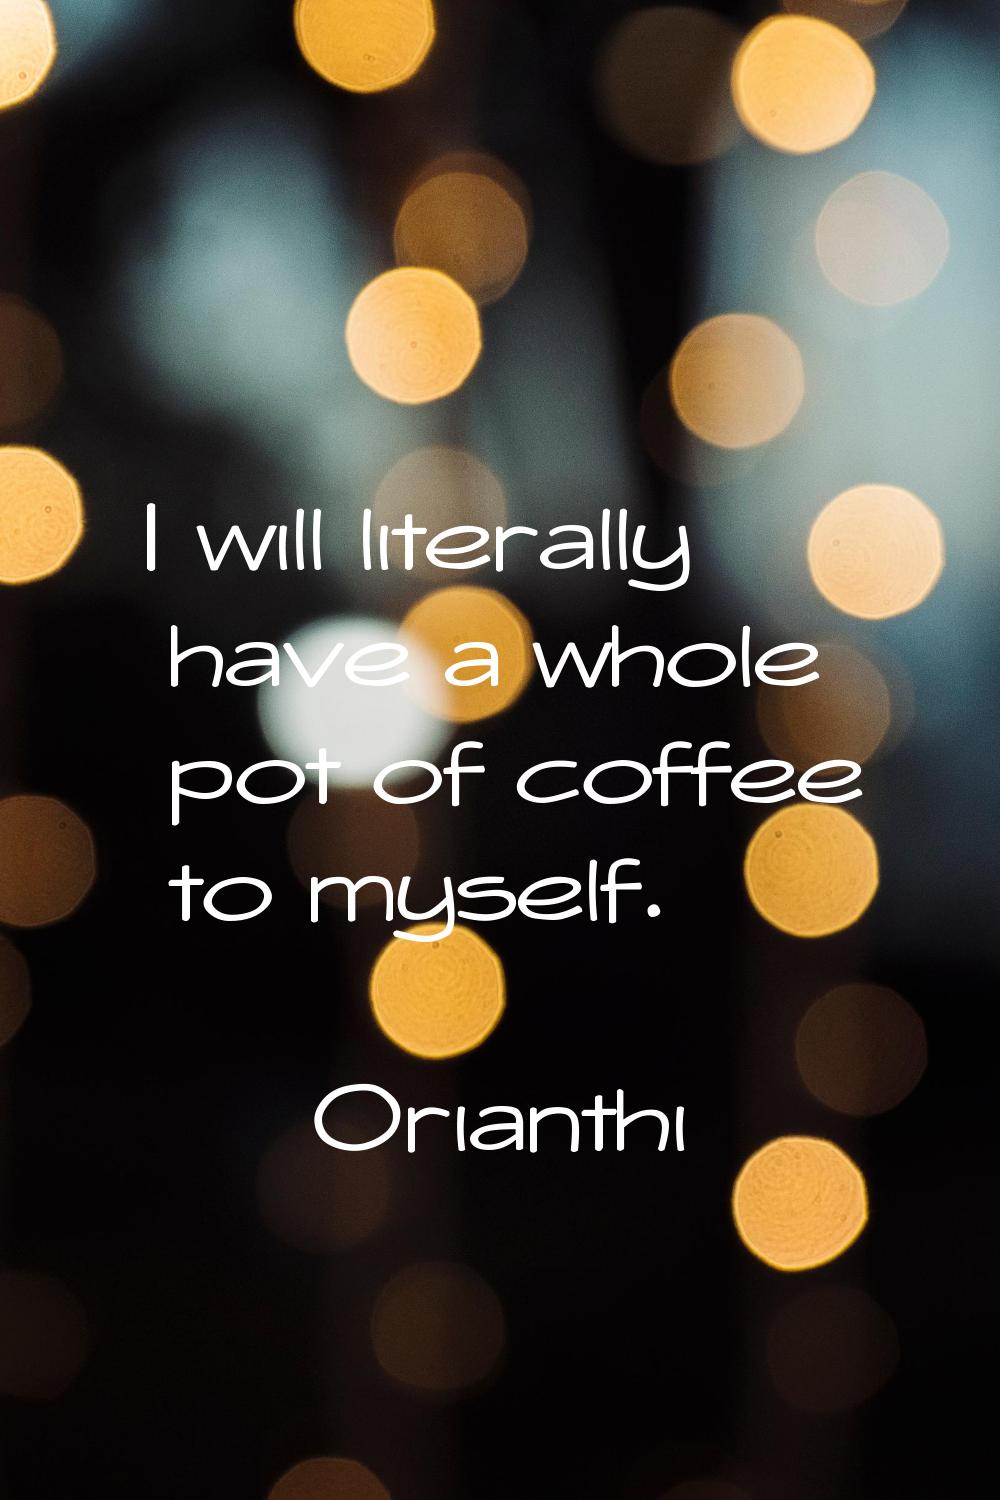 I will literally have a whole pot of coffee to myself.